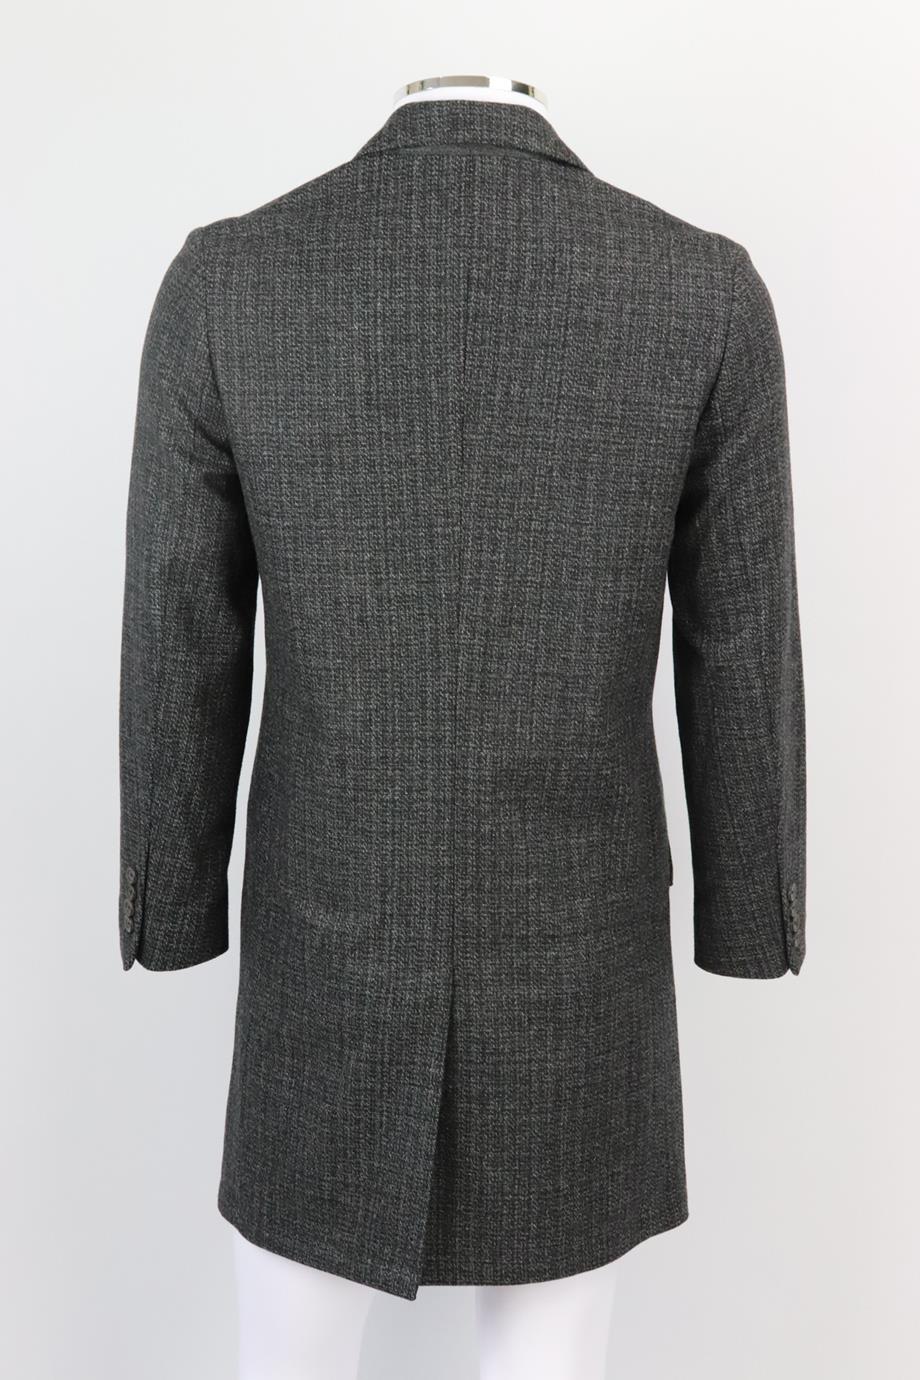 NN07 MEN'S WOOL AND CASHMERE BLEND COAT IT 44 UK/US CHEST 34